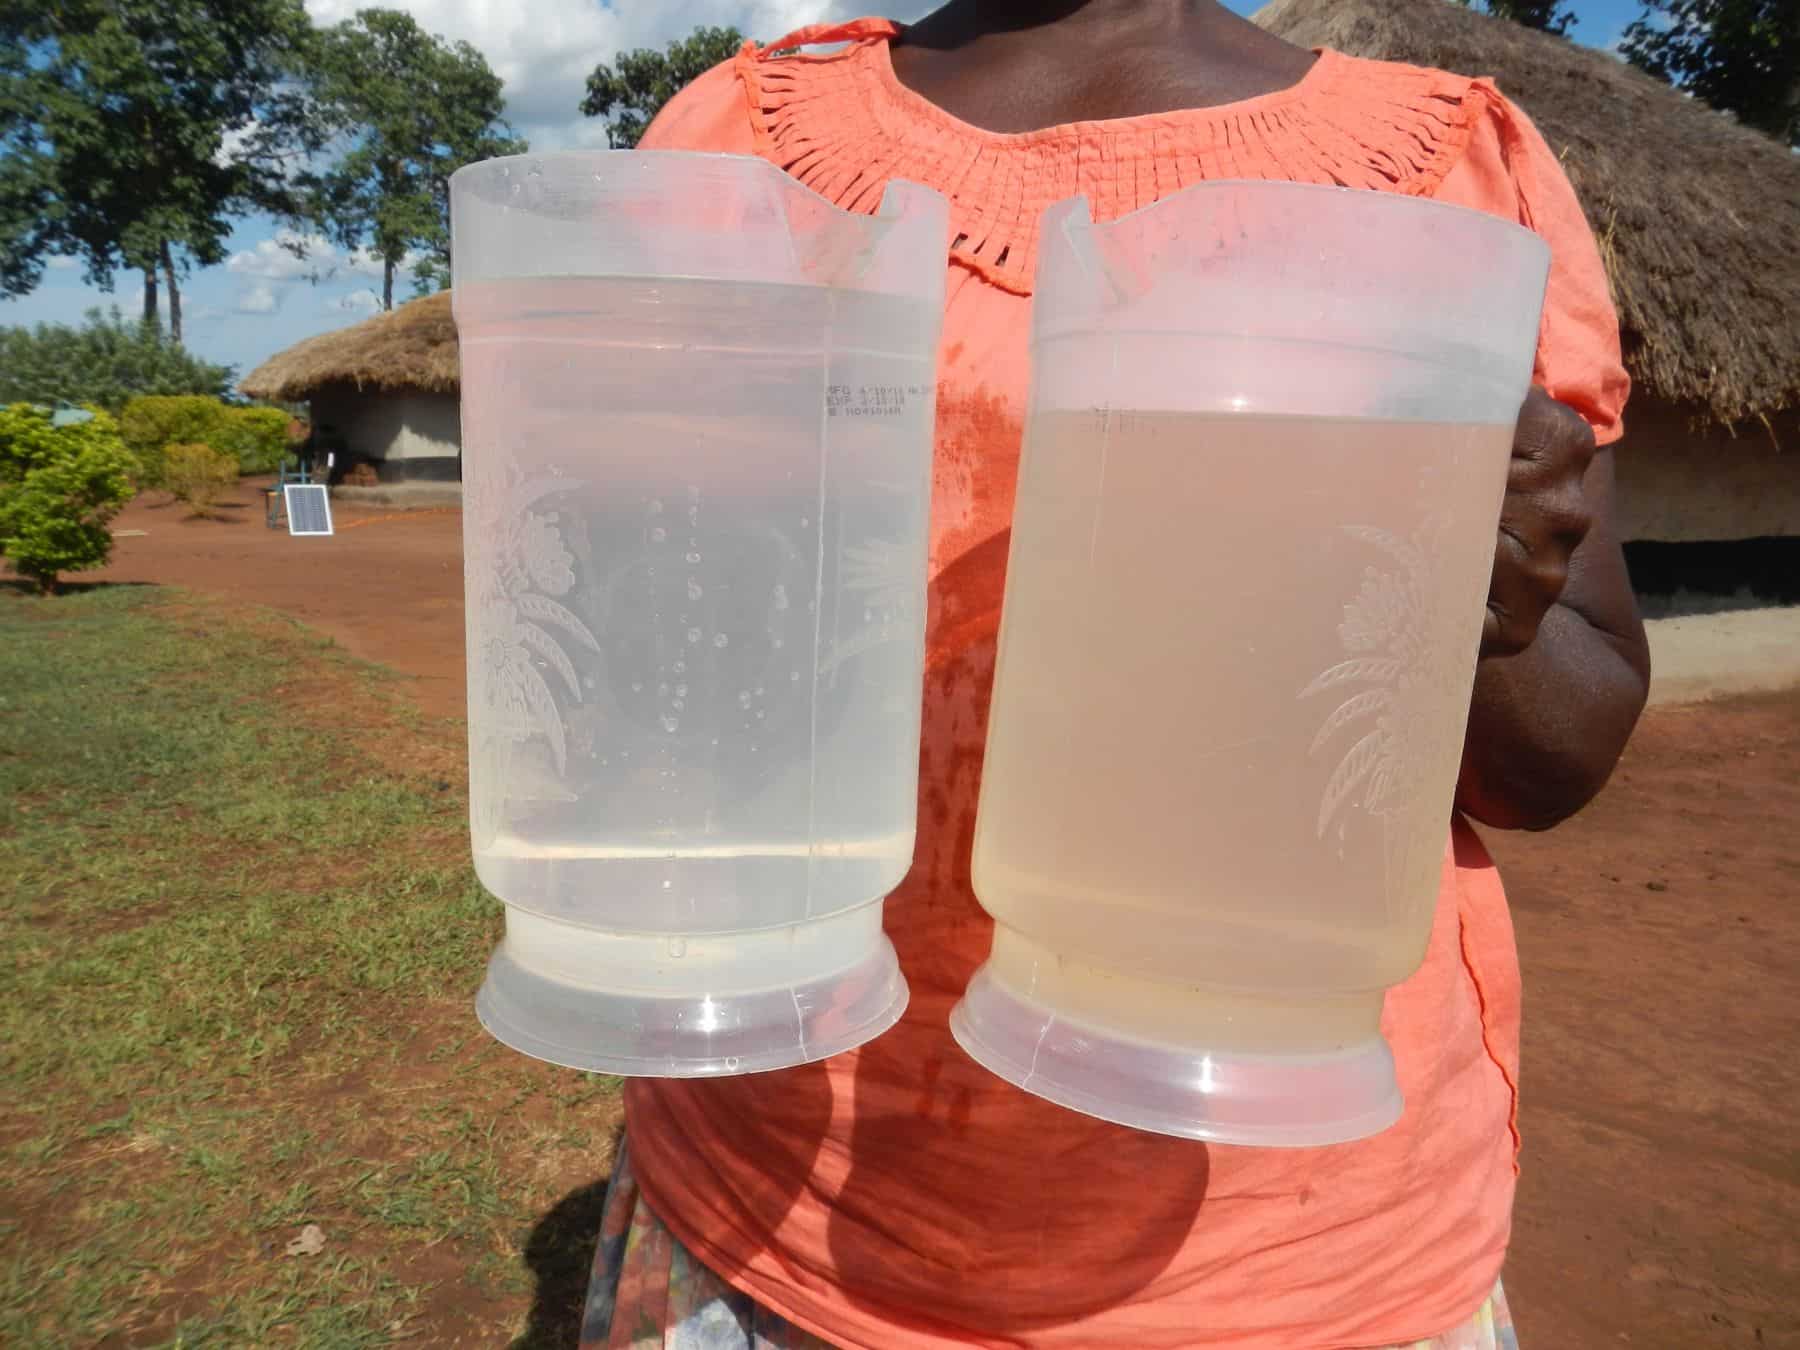 Florence proudly shows unfiltered water on the right, and filtered water on the left.